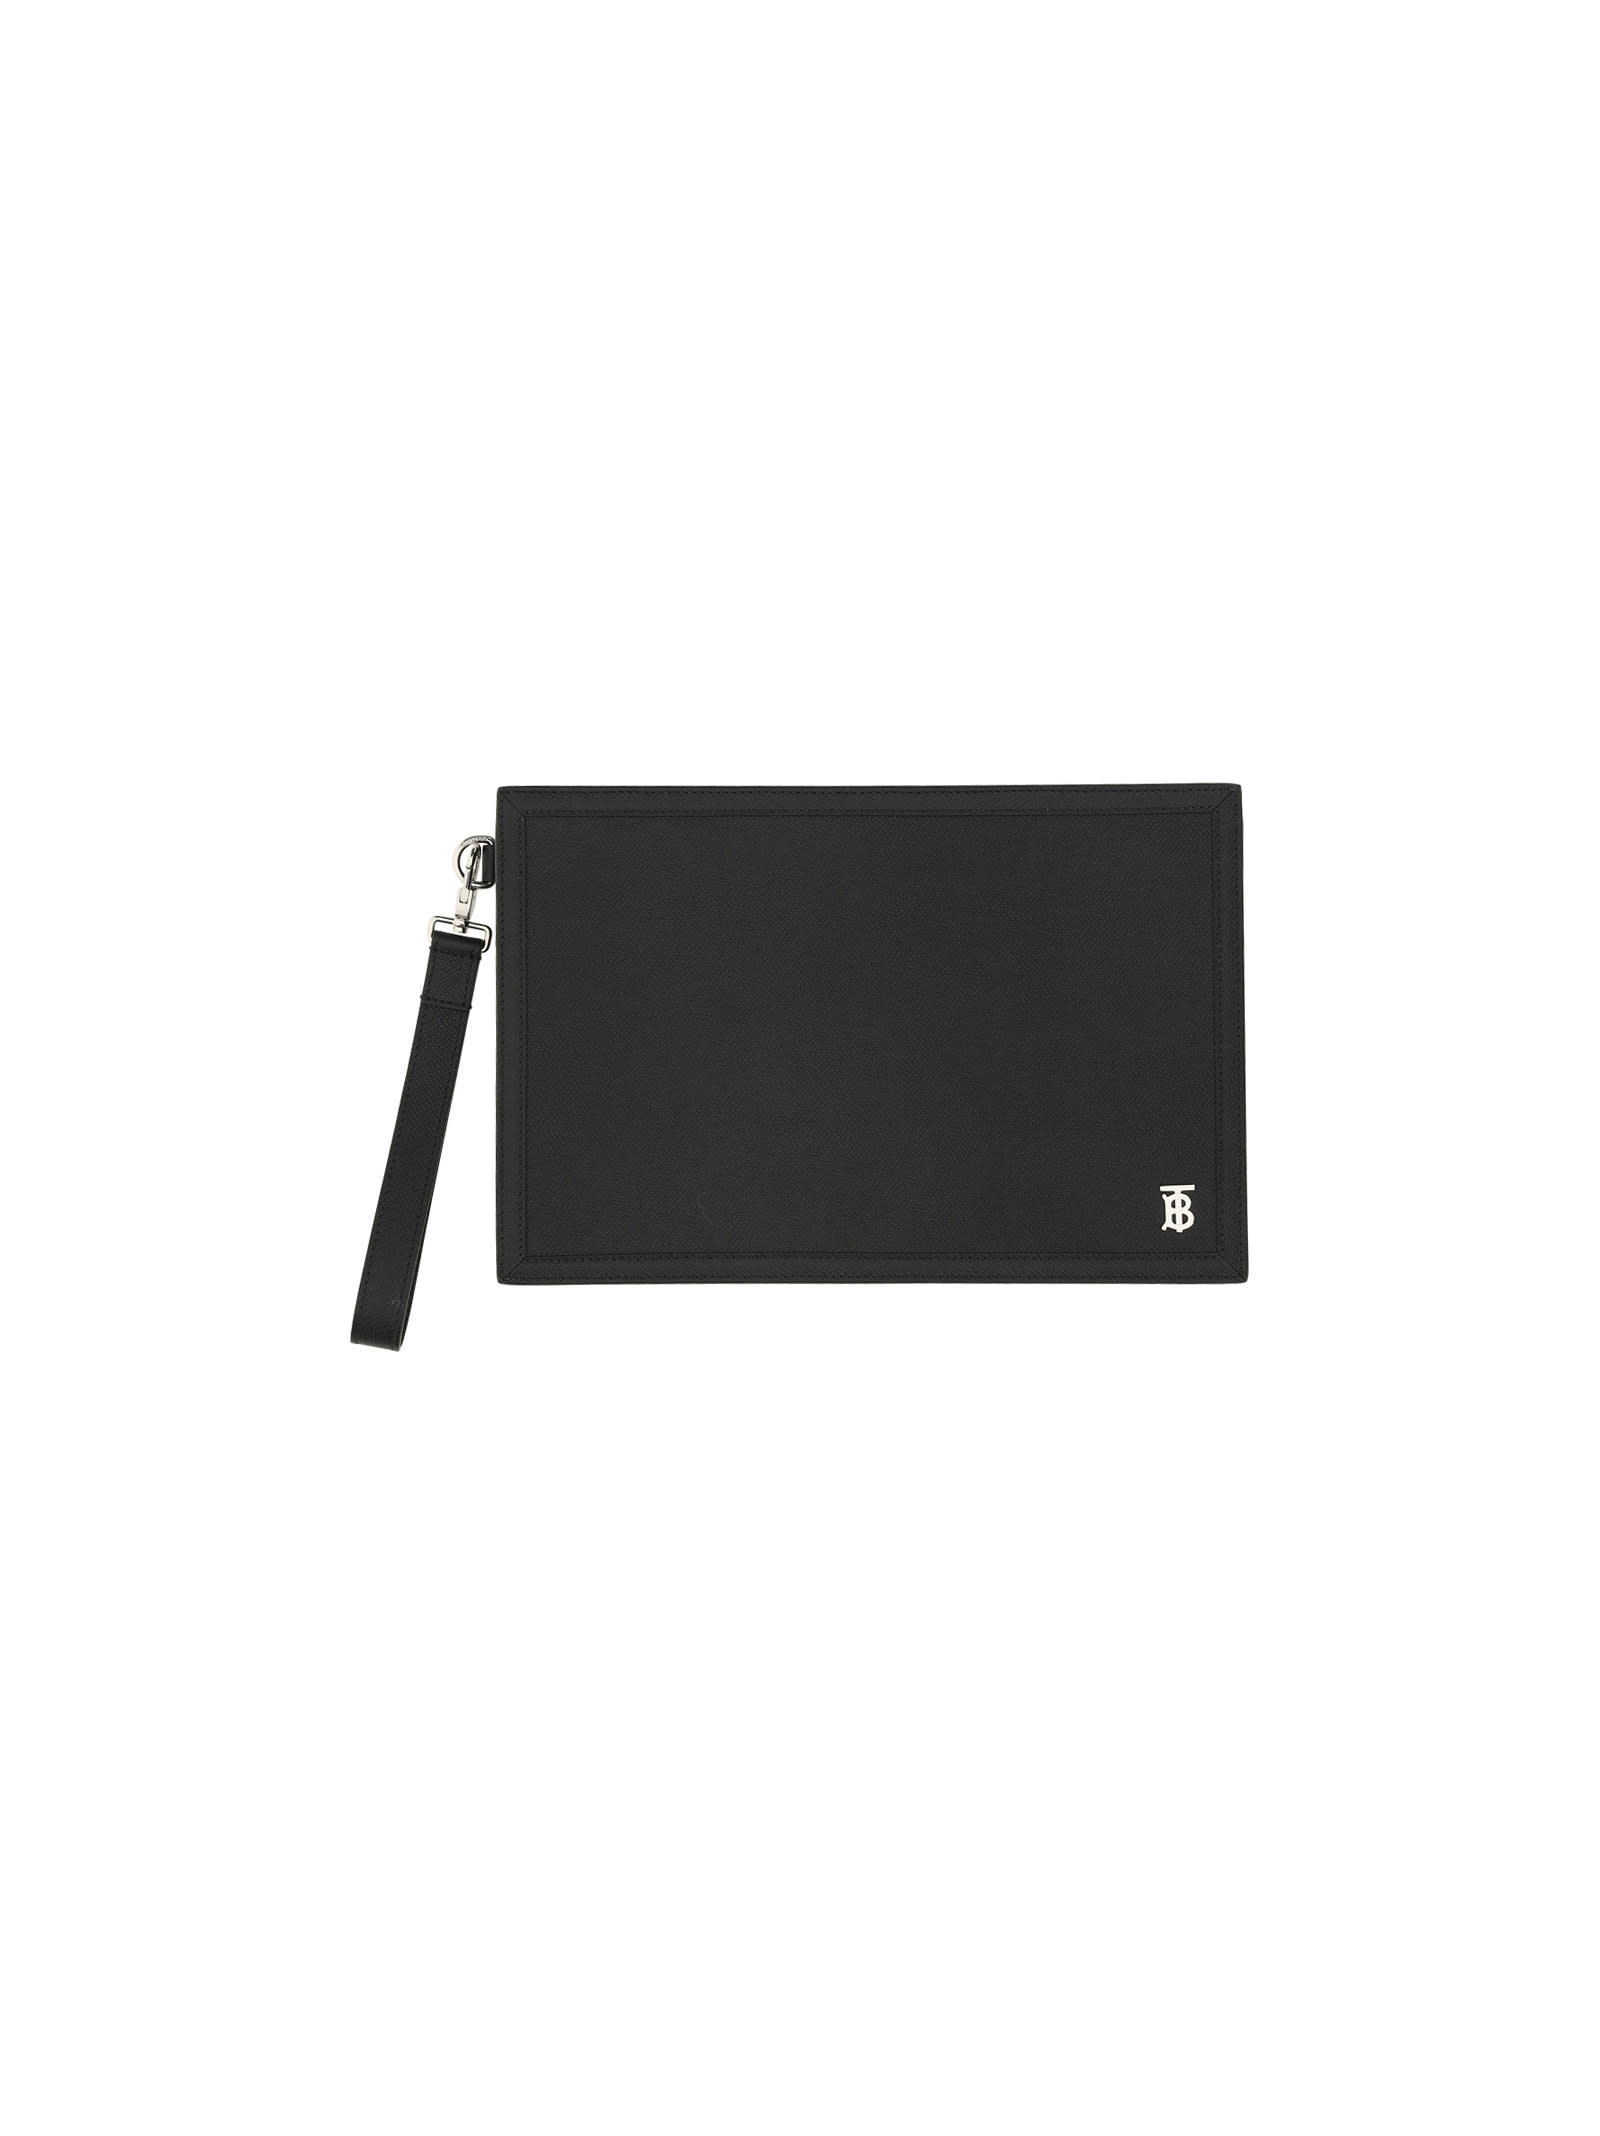 Burberry Frame Pouch